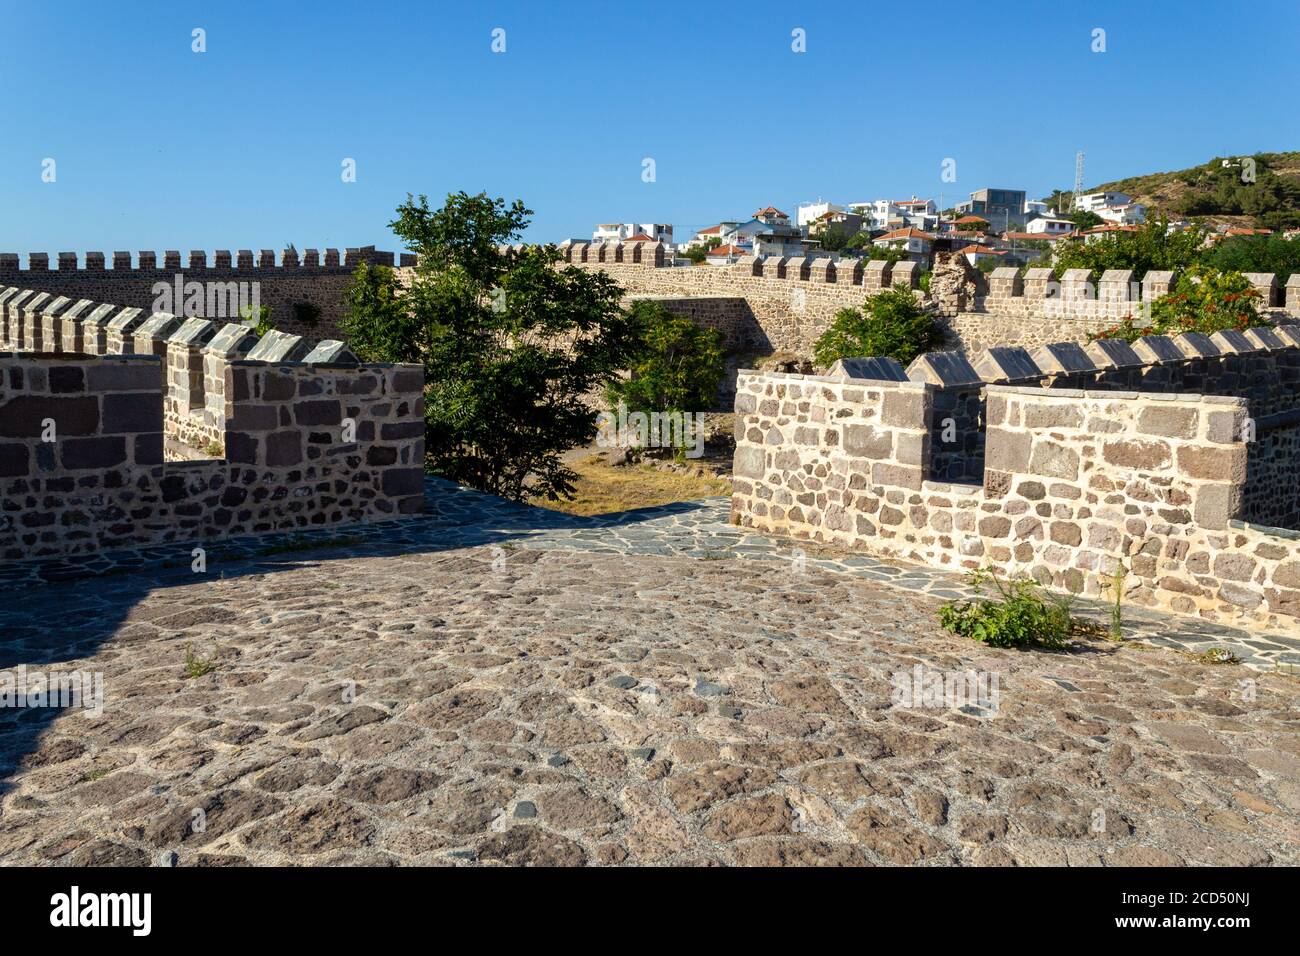 Babakale, Canakkale / Turkey - July 18 2020: Babakale Castle and town center Turkey and the western most point of continental Asia Stock Photo